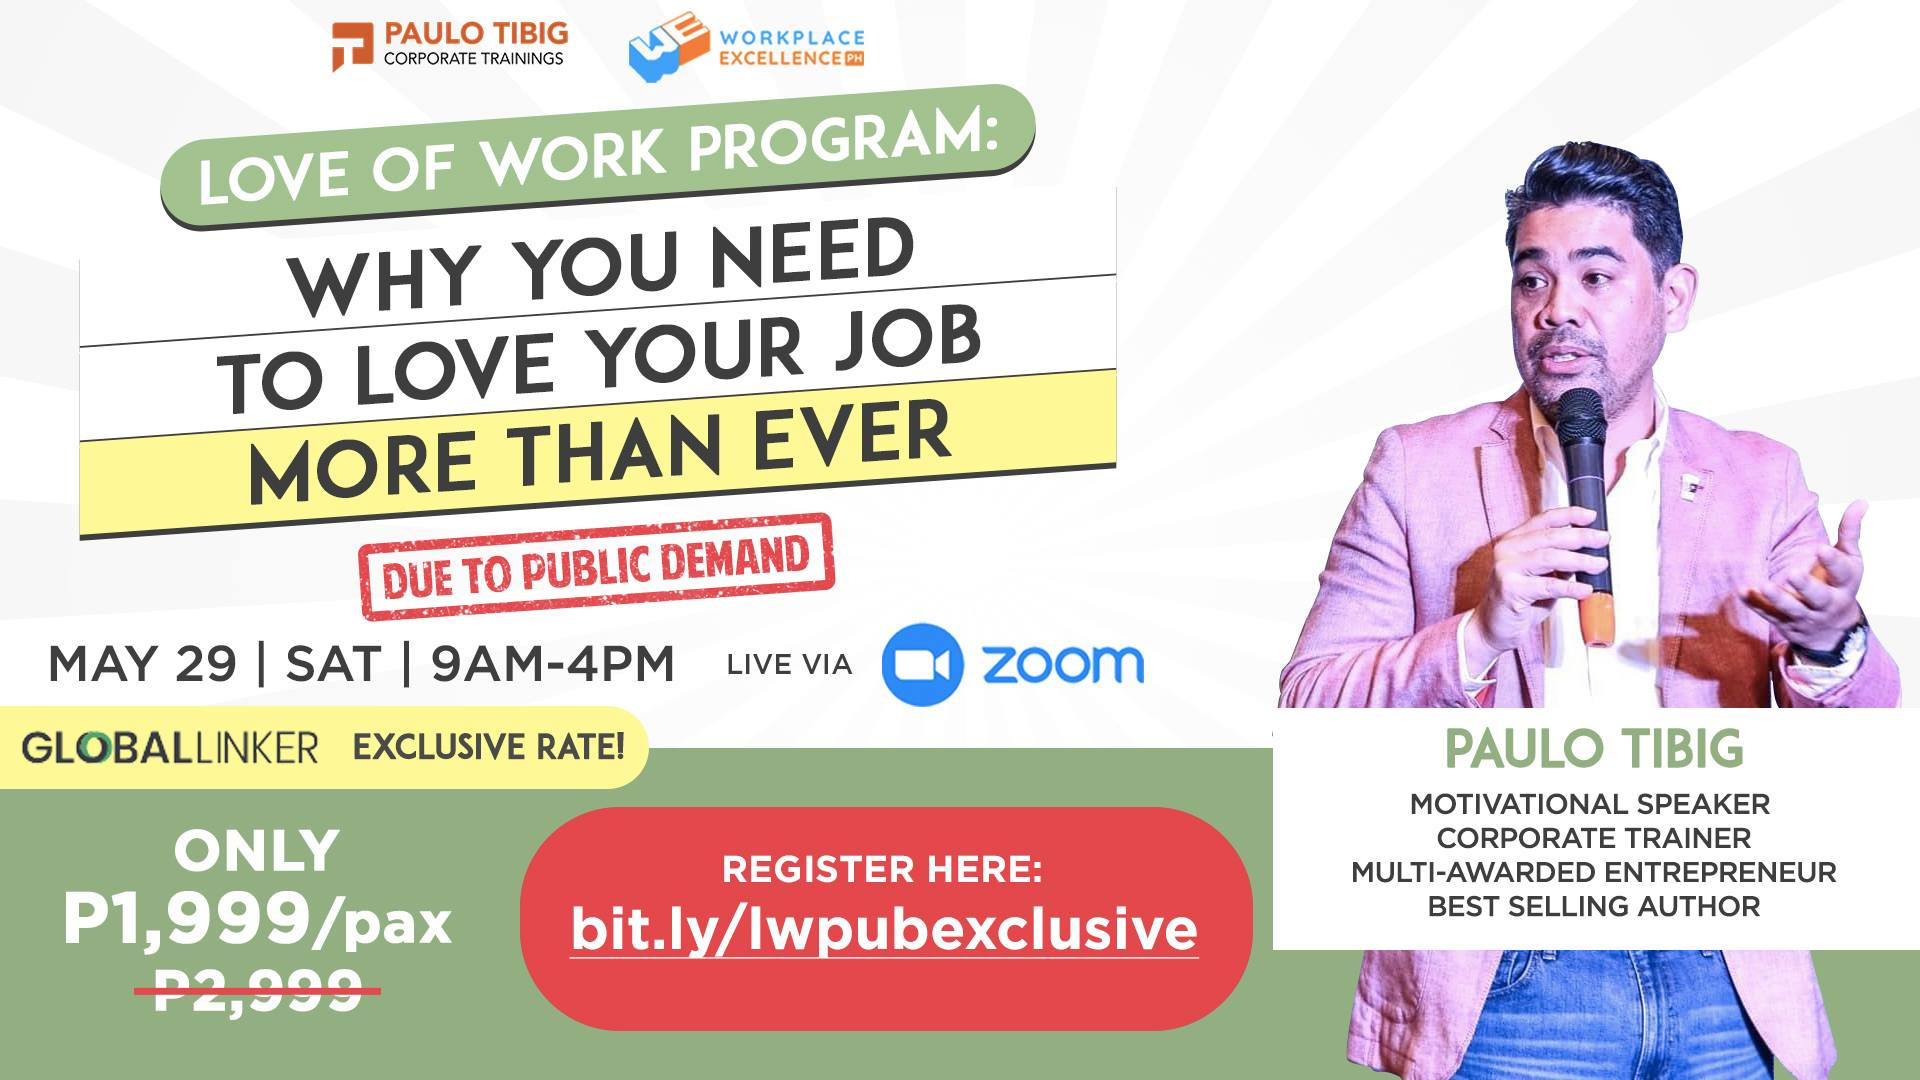 LOVE OF WORK PROGRAM: WHY YOU NEED TO LOVE YOUR JOB MORE THAN EVER